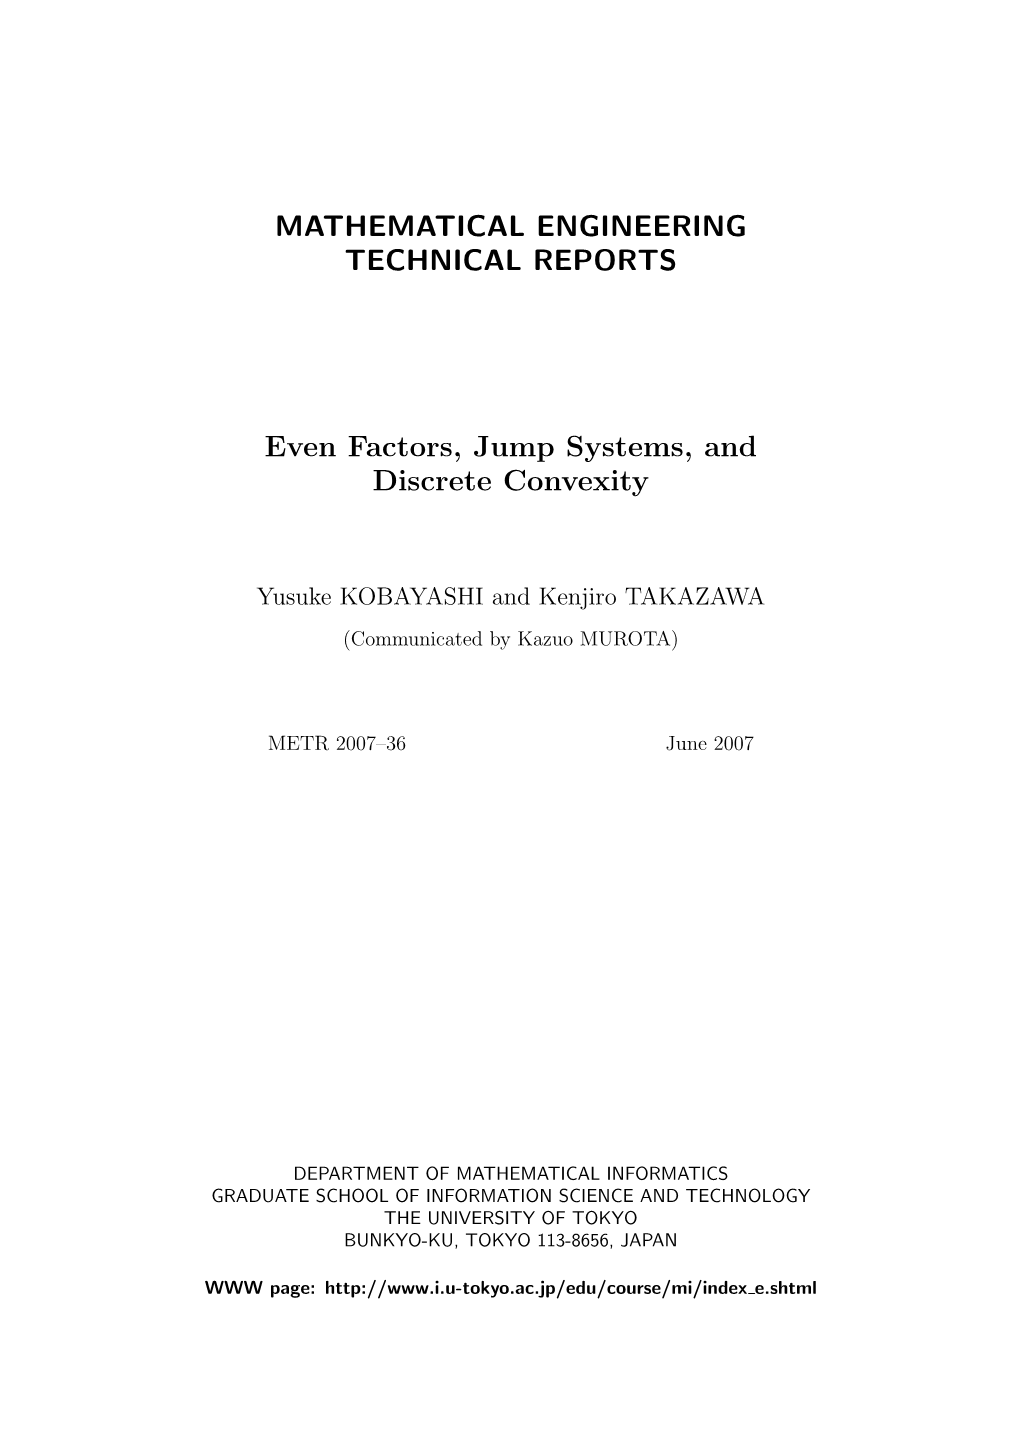 MATHEMATICAL ENGINEERING TECHNICAL REPORTS Even